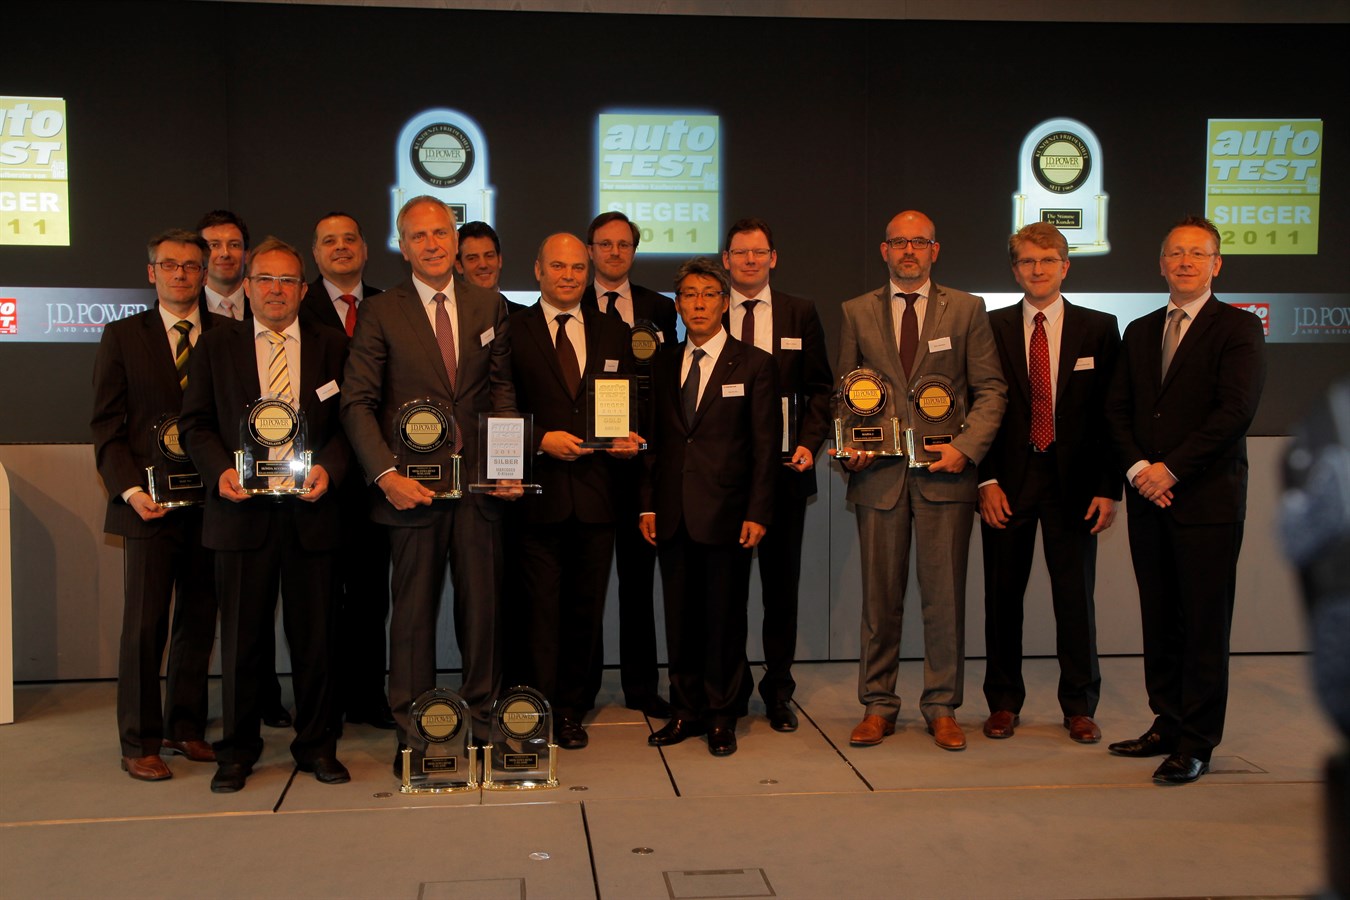 All the prize winners from the J.D. Power study in Berlin.